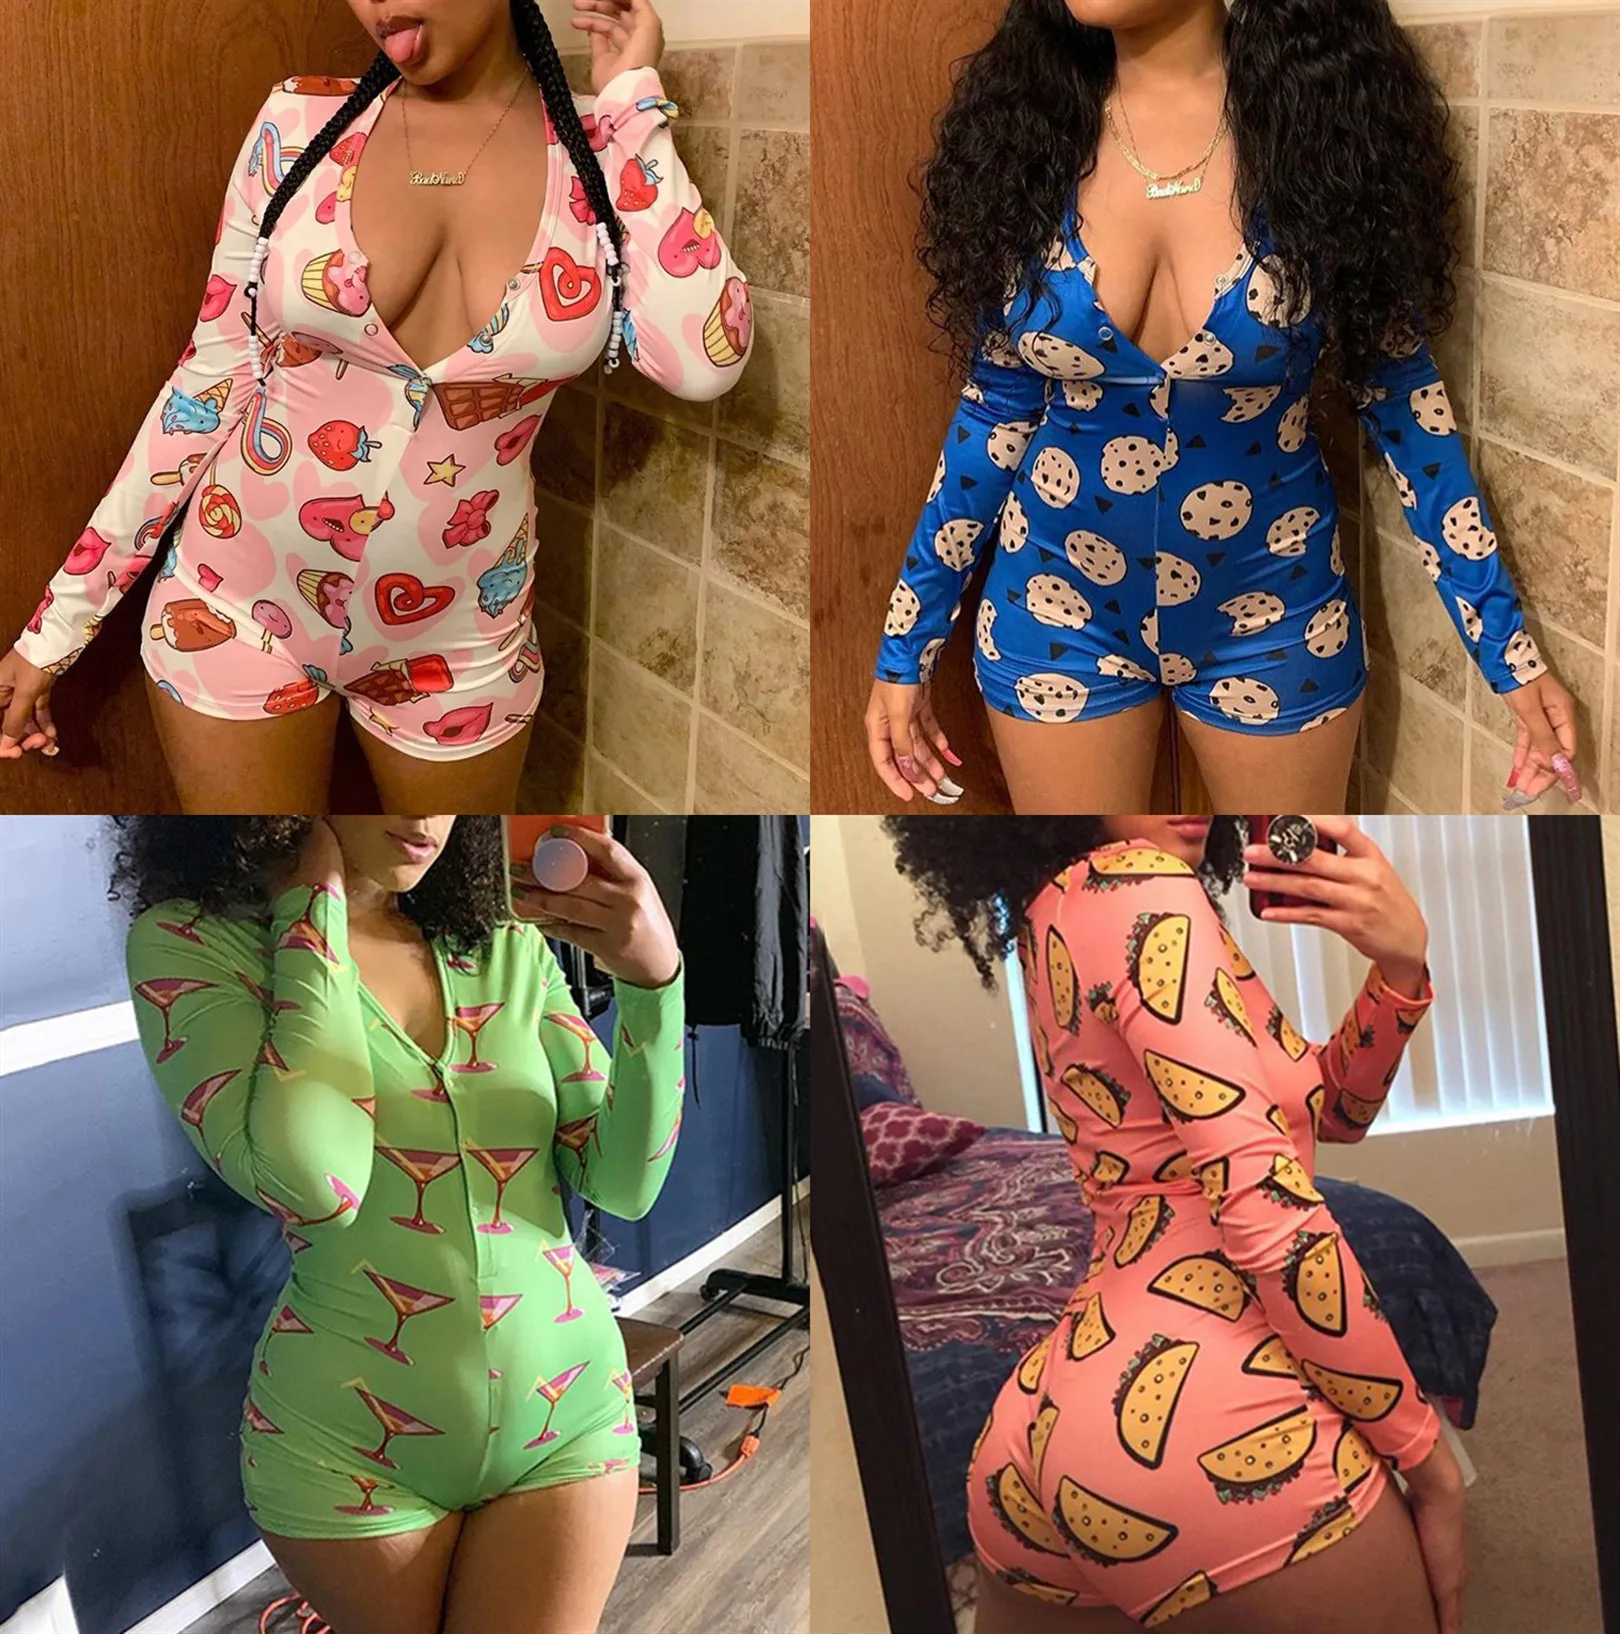 

Stretchy Sexy Onesies for Adults Pajamas for Women Onesie Button Bodysuit Leotard Short Sleepwear Jumpsuit Rompers Onsie Party